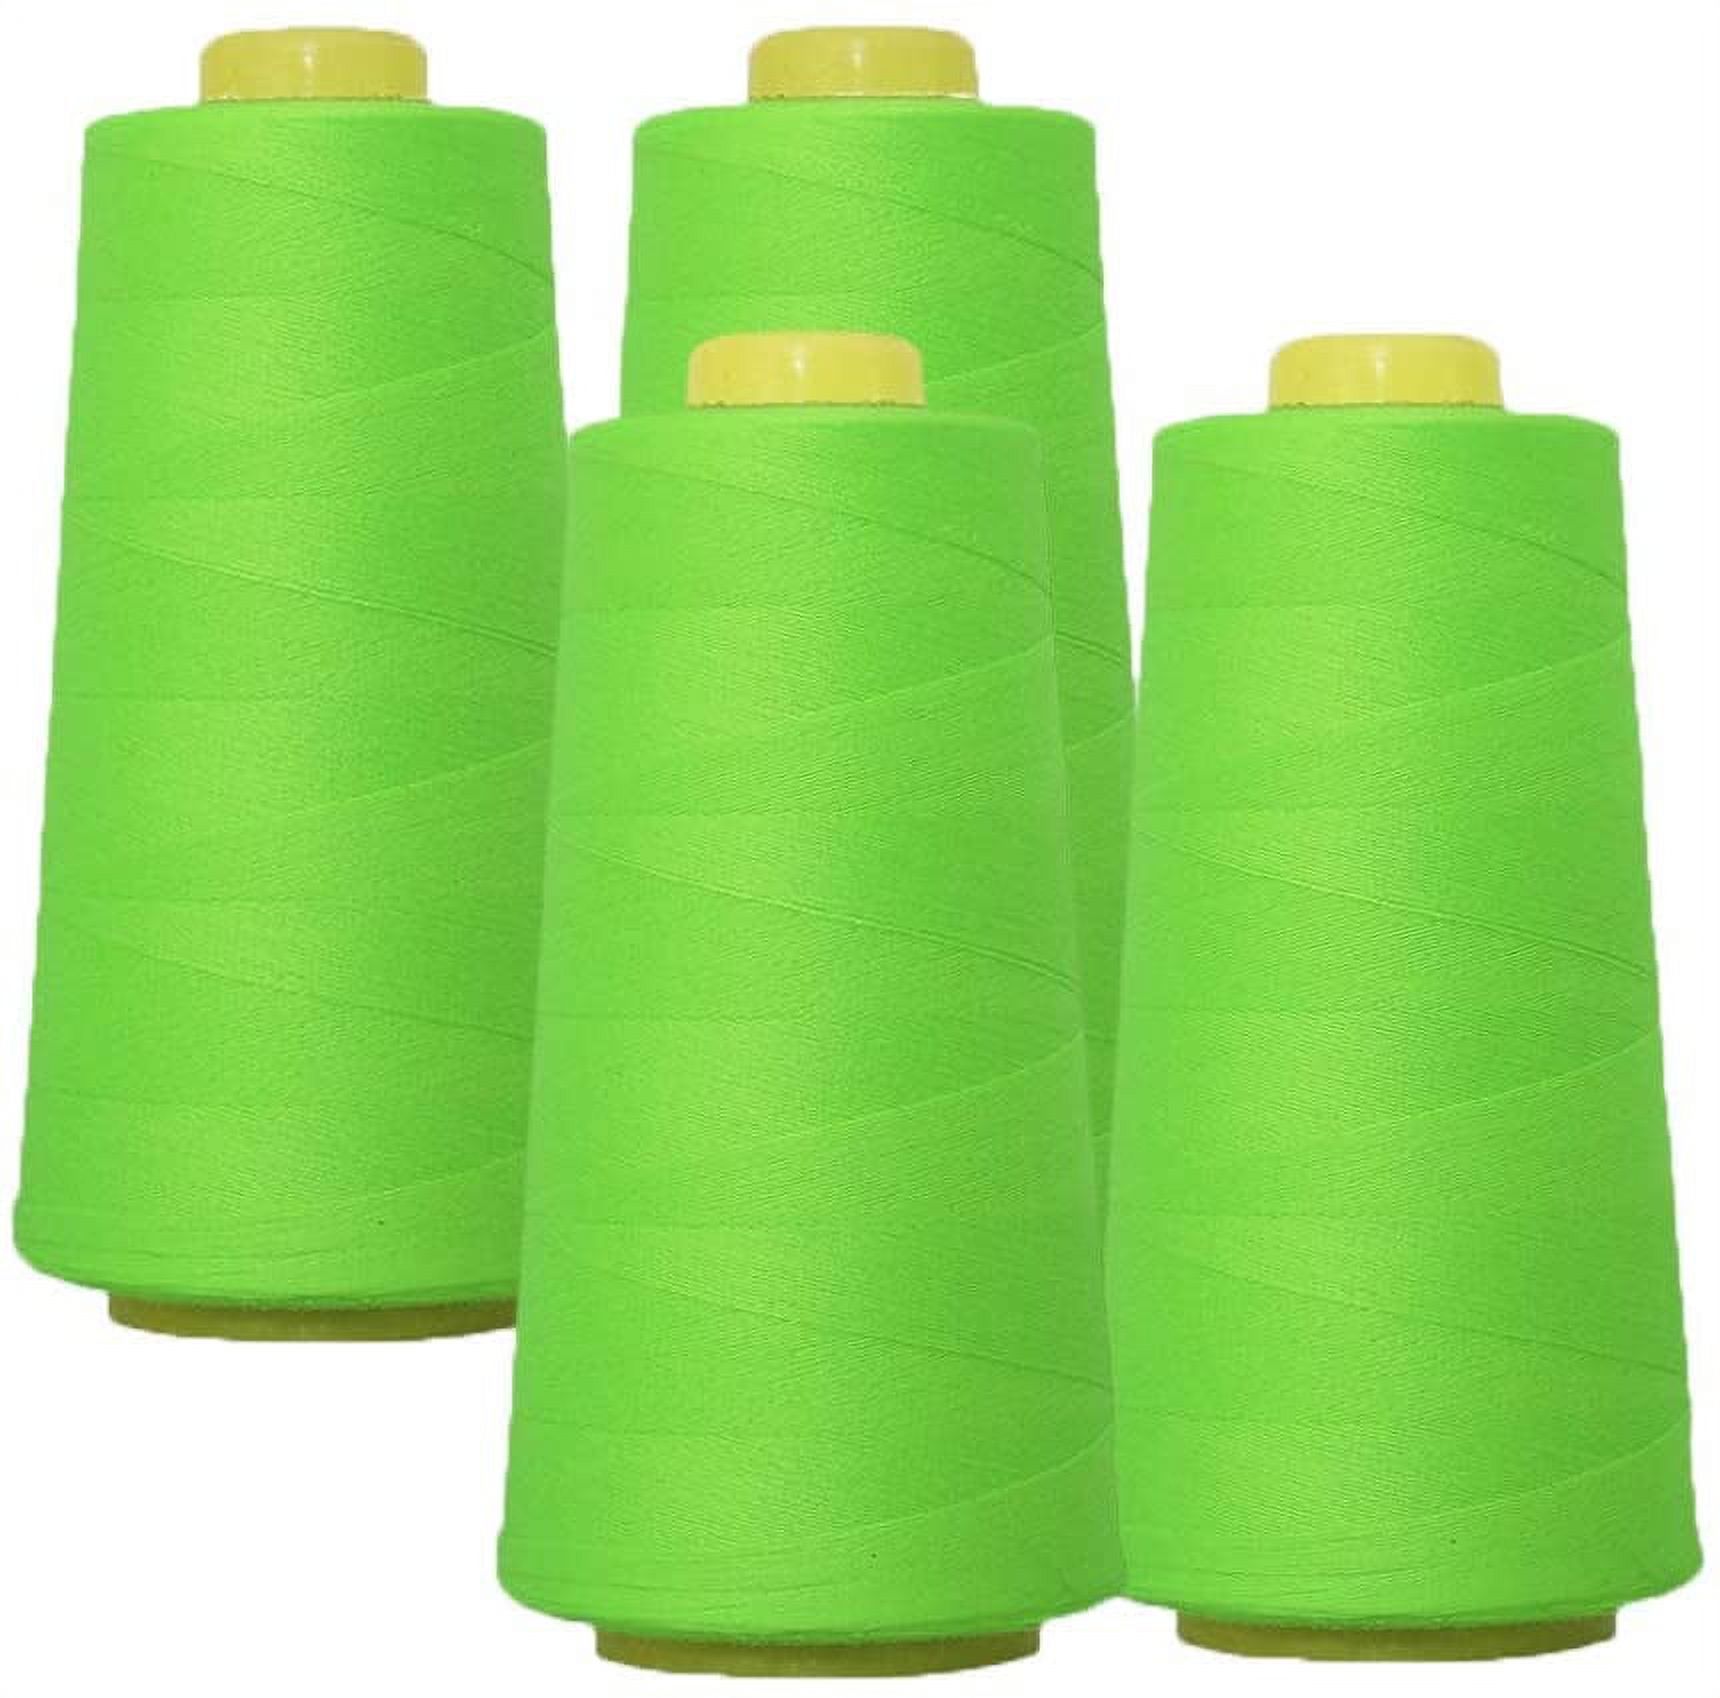 AK Trading 4-Pack NEON Green All Purpose Sewing Thread Cones (6000 Yards  Each) of High Tensile Polyester Thread Spools for Sewing, Quilting, Serger  Machines,Overlock, Merrow & Hand Embroide 